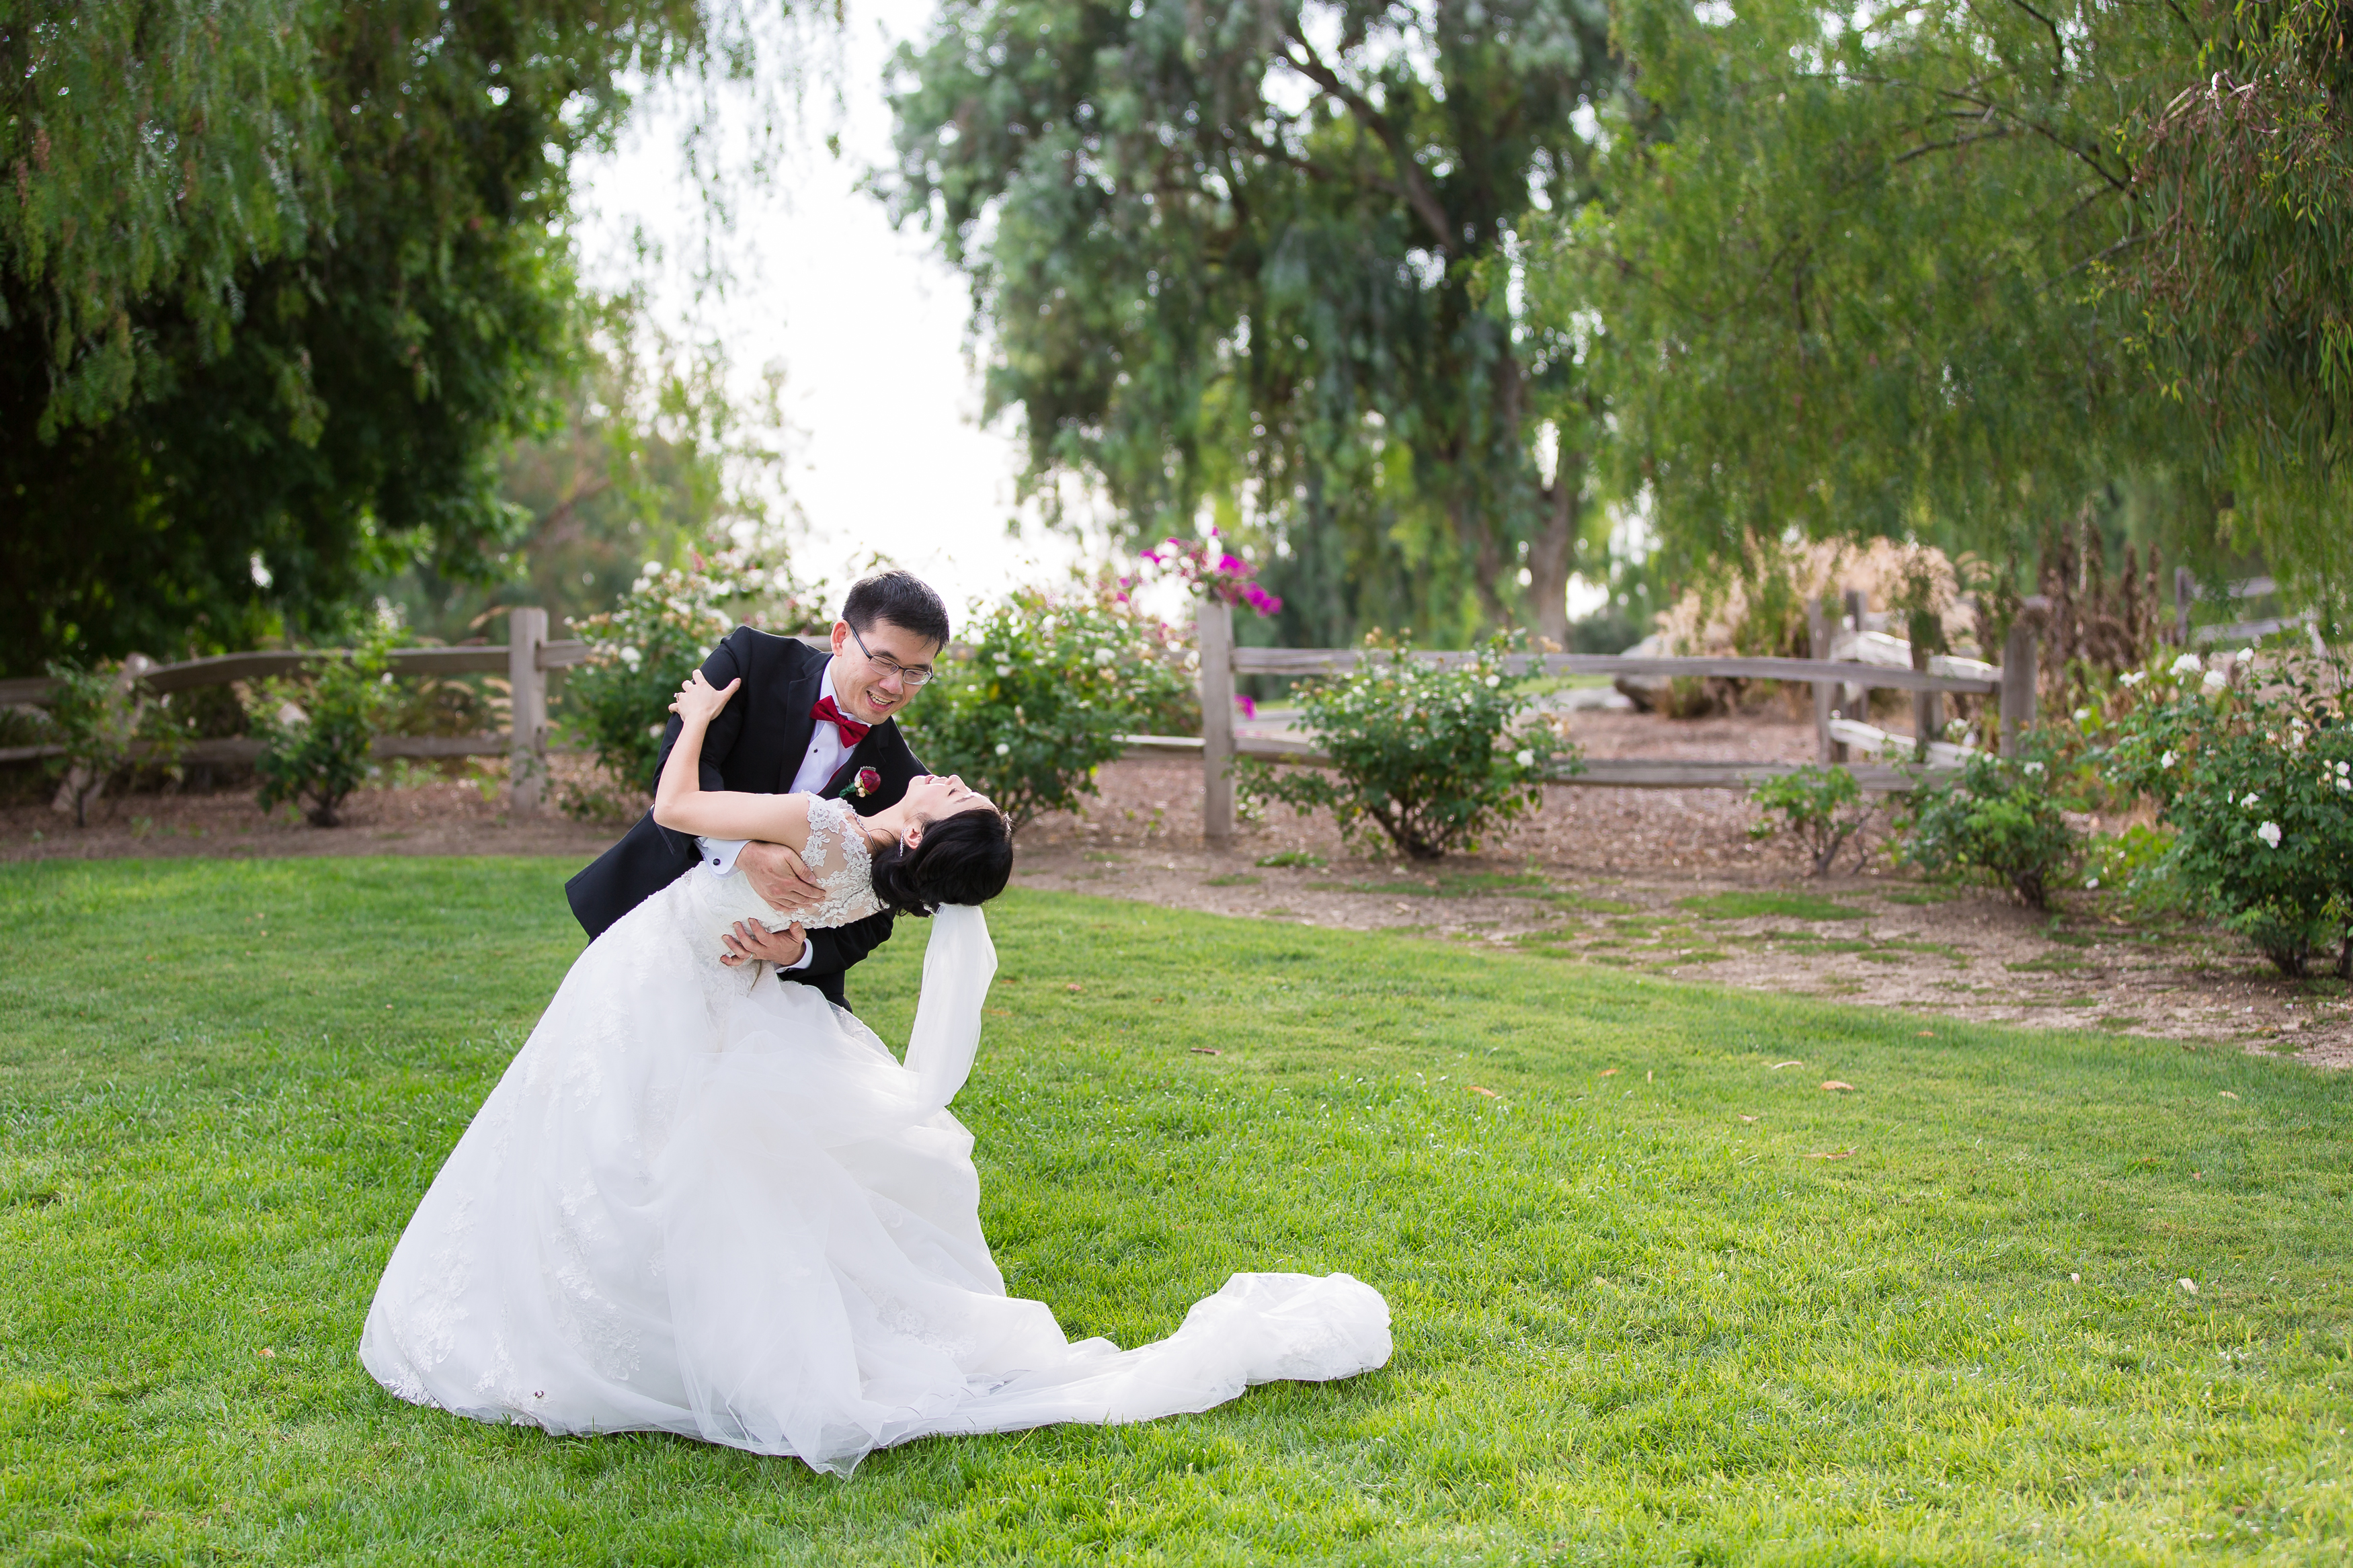 Bride and groom dancing on lawn at Pacific Palms Resort Wedding